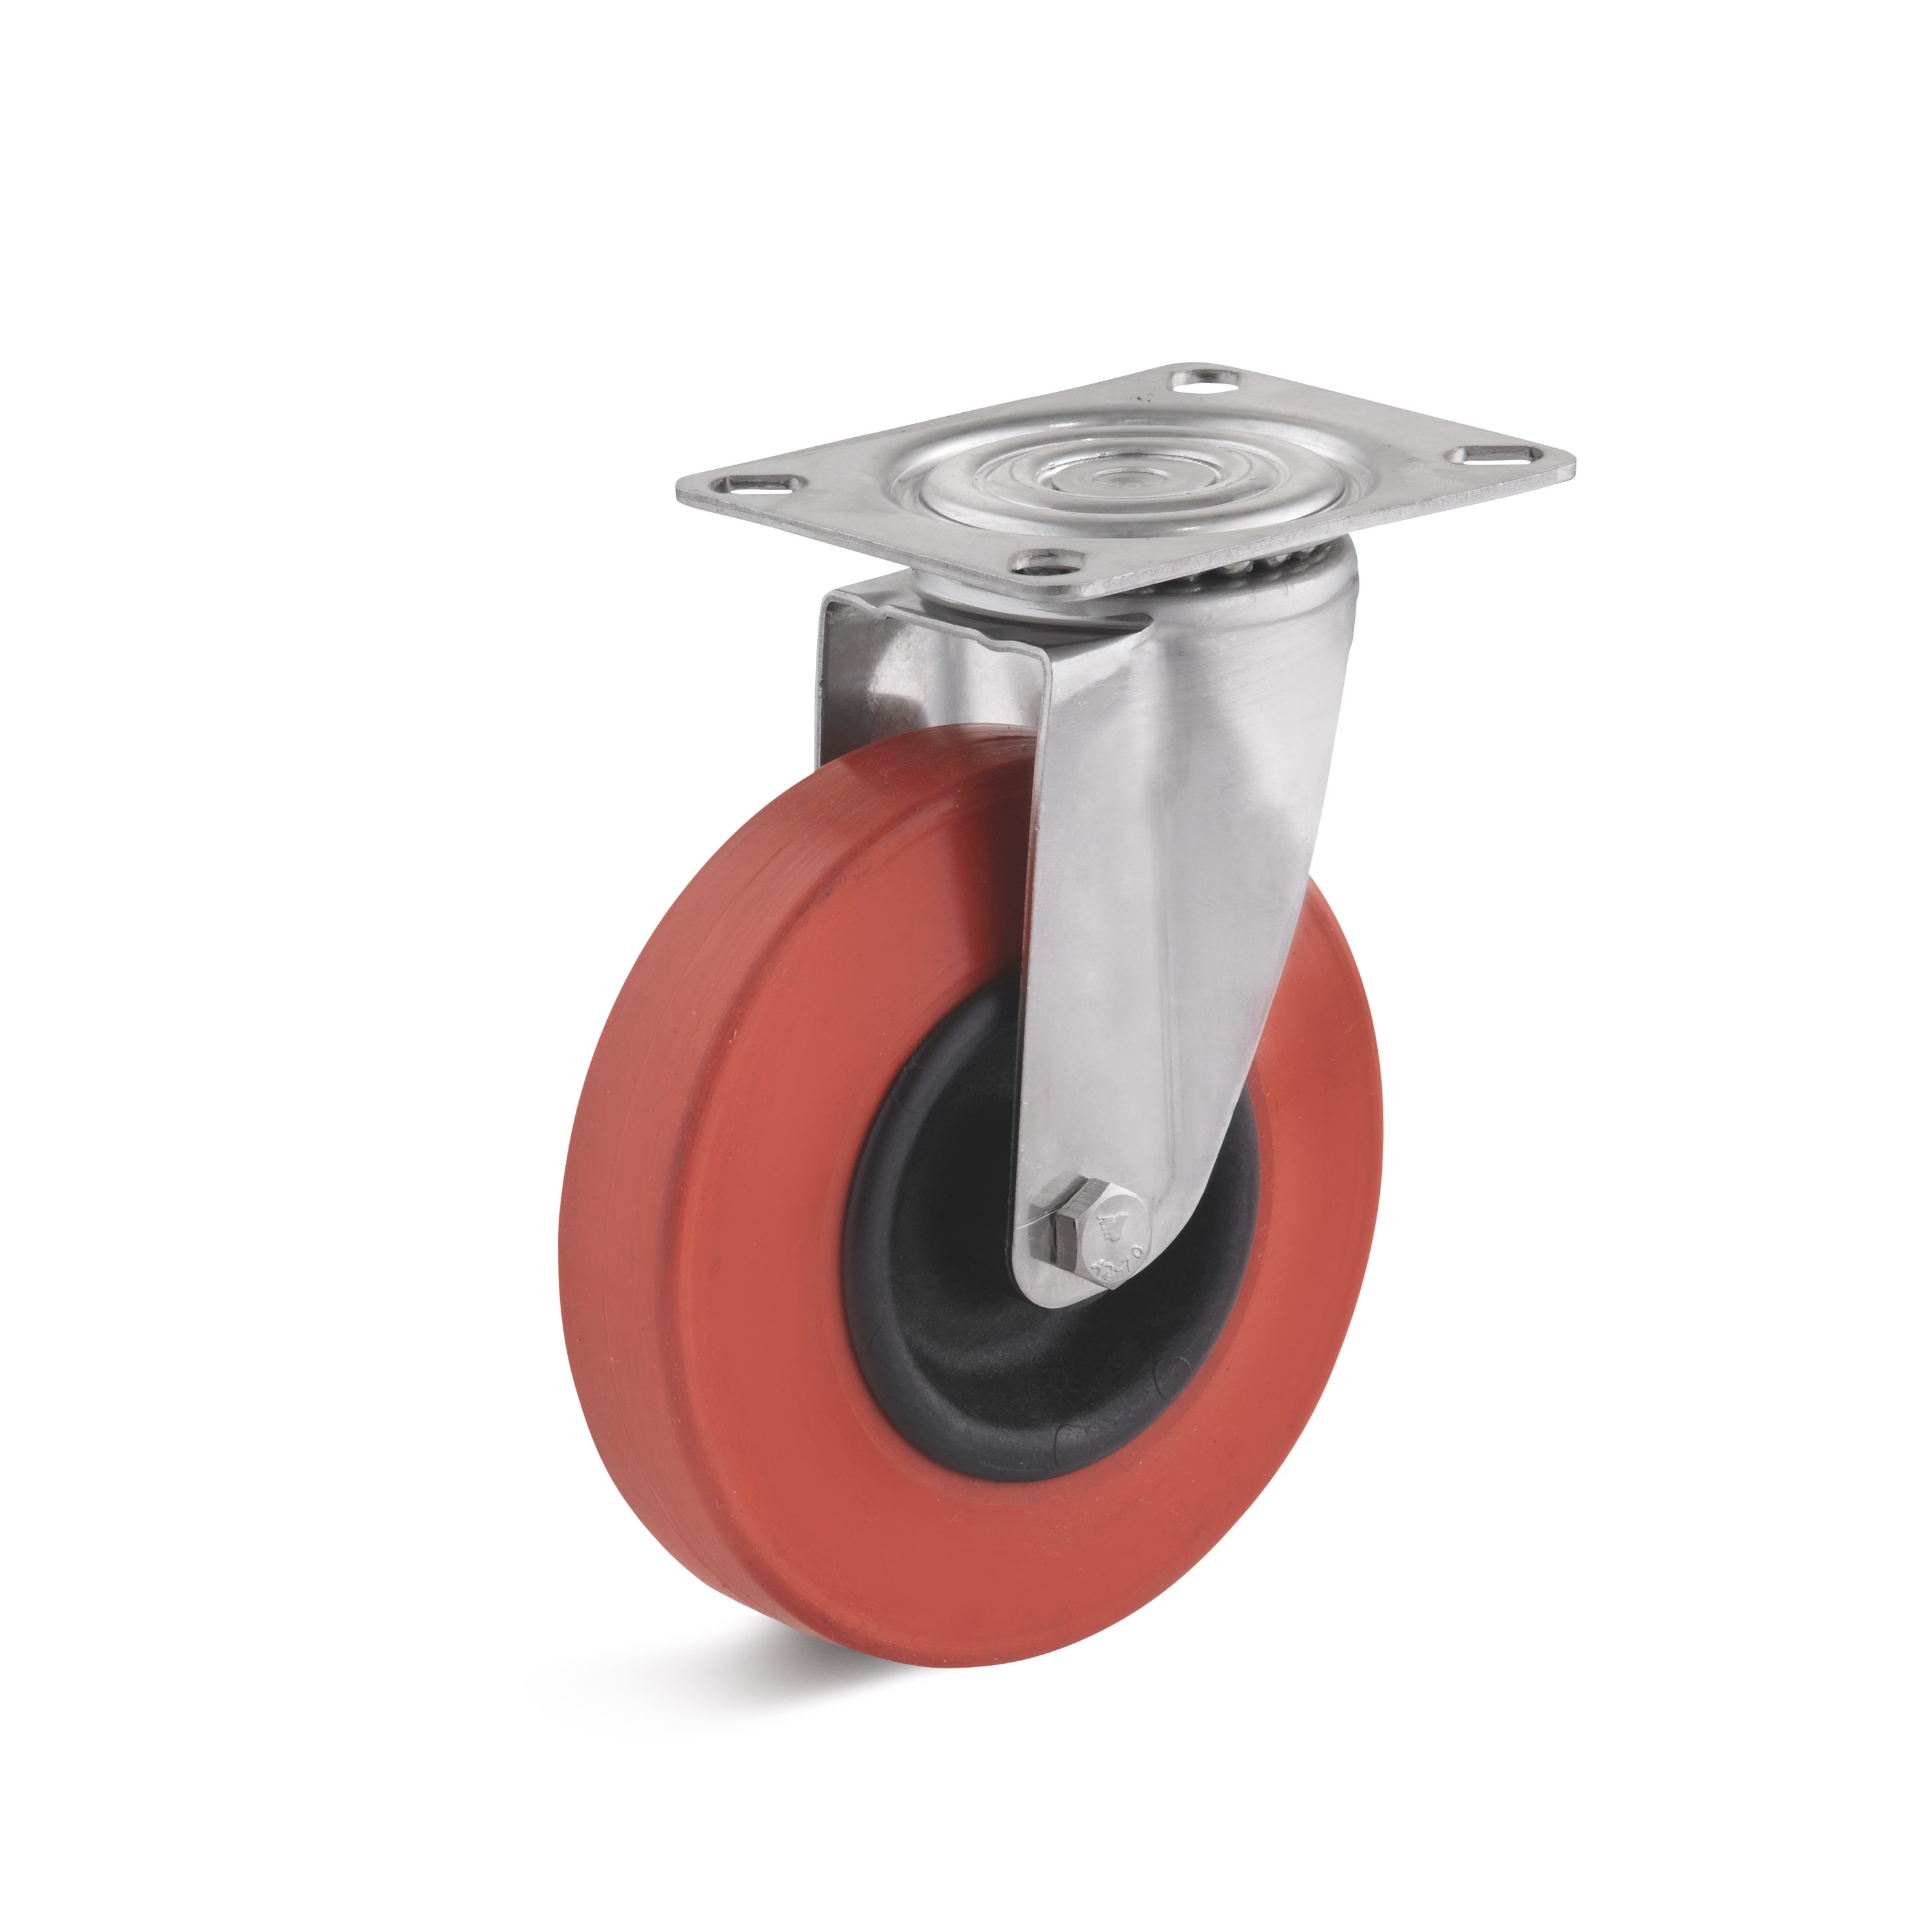 Stainless steel swivel castor with heat resistant rubber wheel L-IV-HGK-100-G-3-ROT